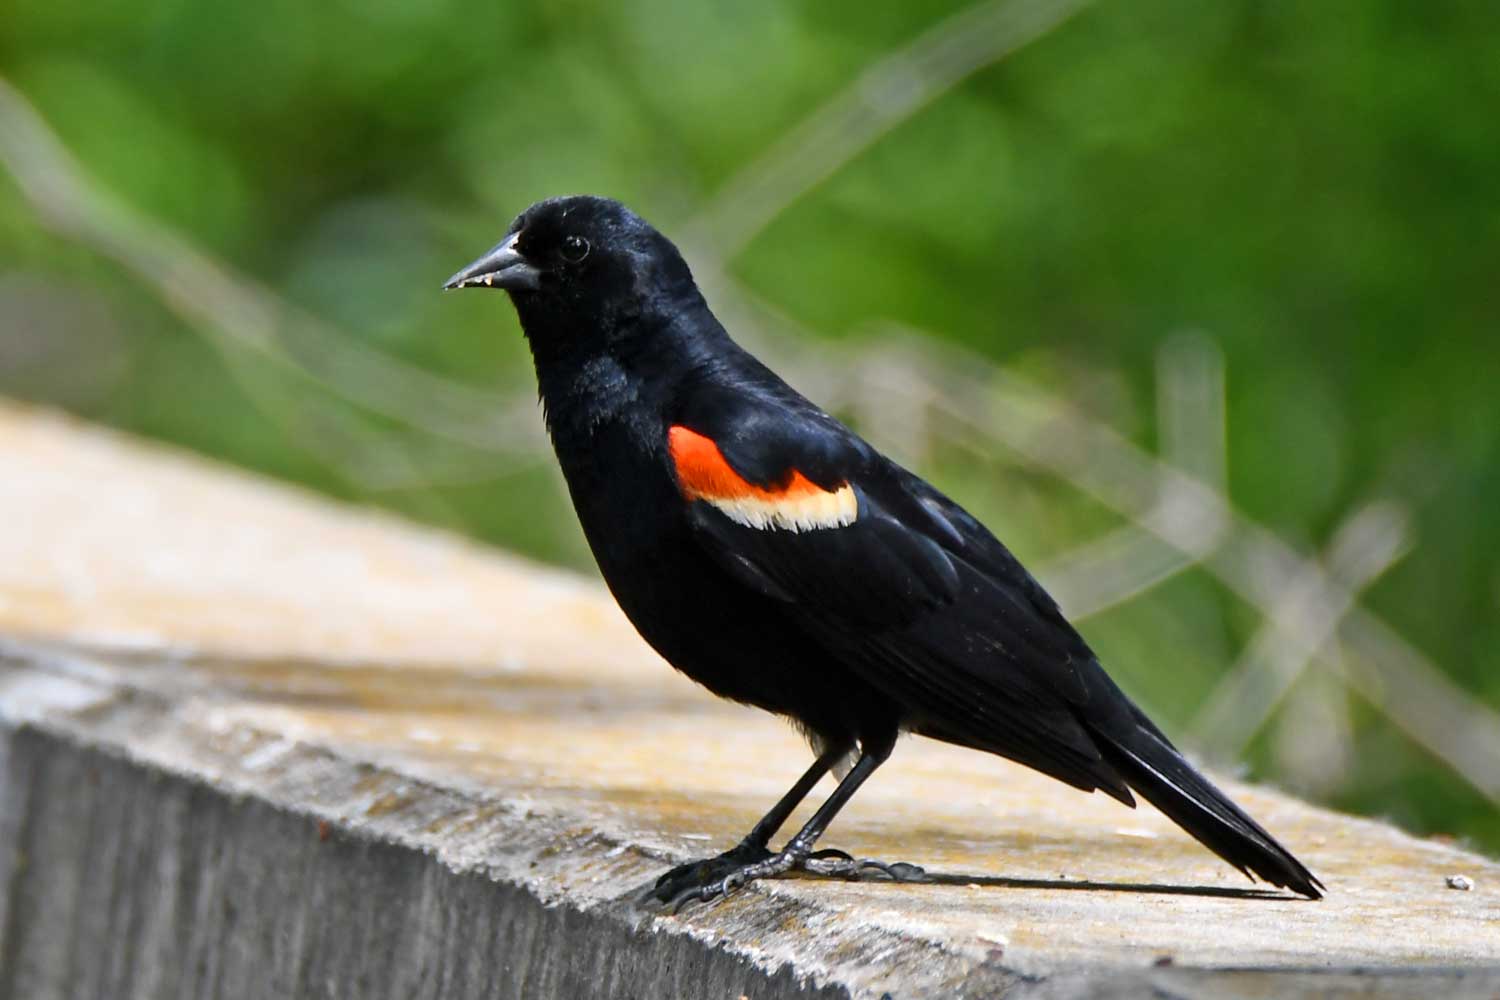 Male red-winged blackbird standing on a stone barrier.